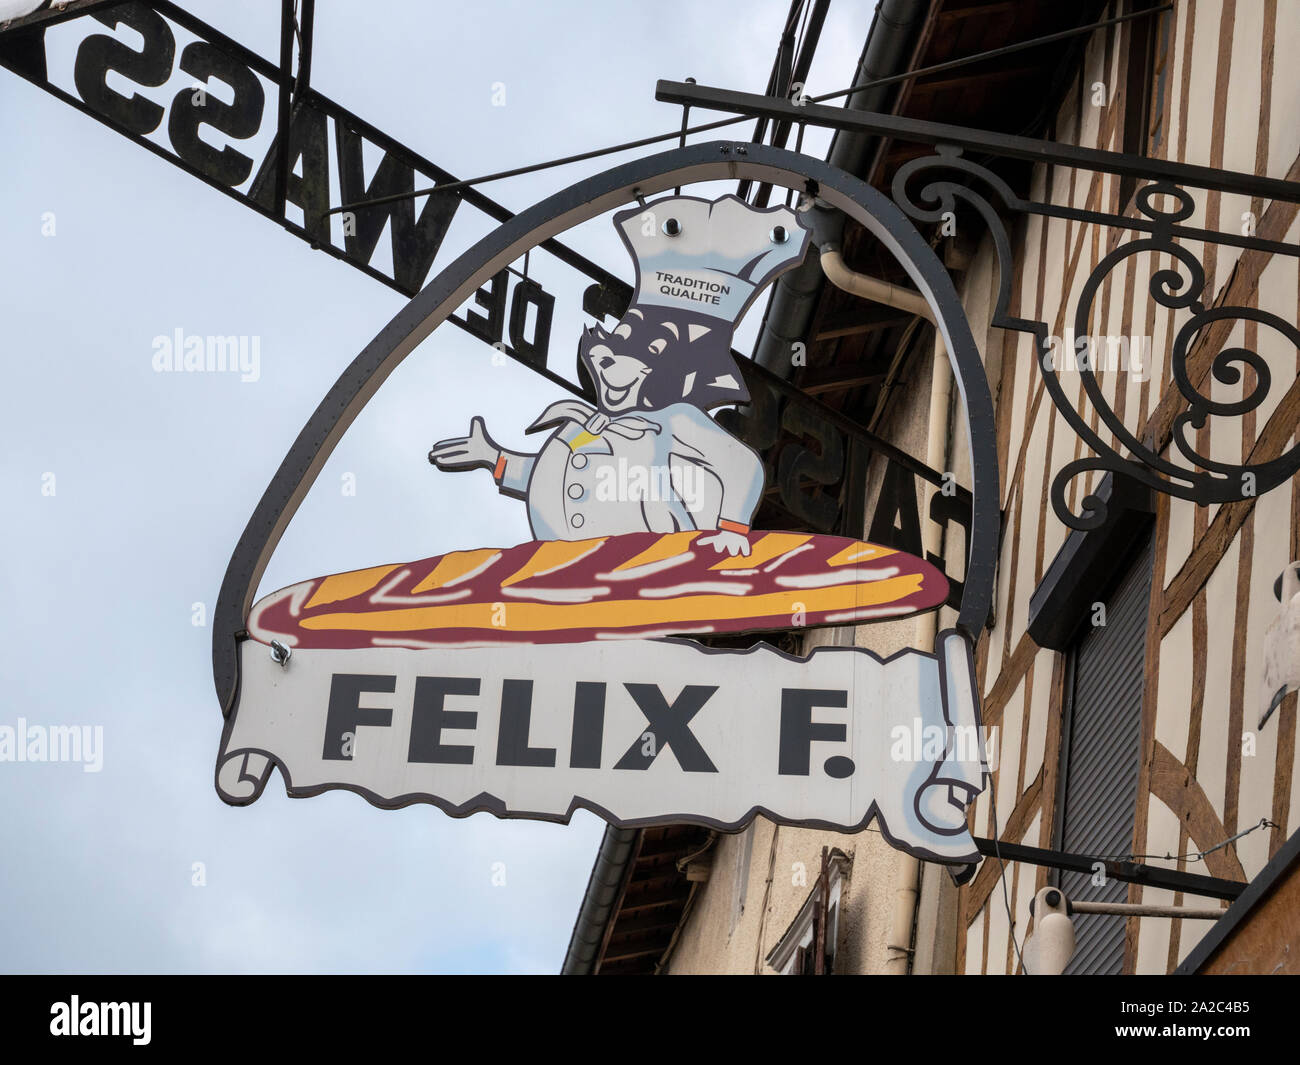 The ornate sign for Felix F boulangerie or french bakers shop in Wassy, Haut-Marne, Champagne-Ardennes region of France Stock Photo